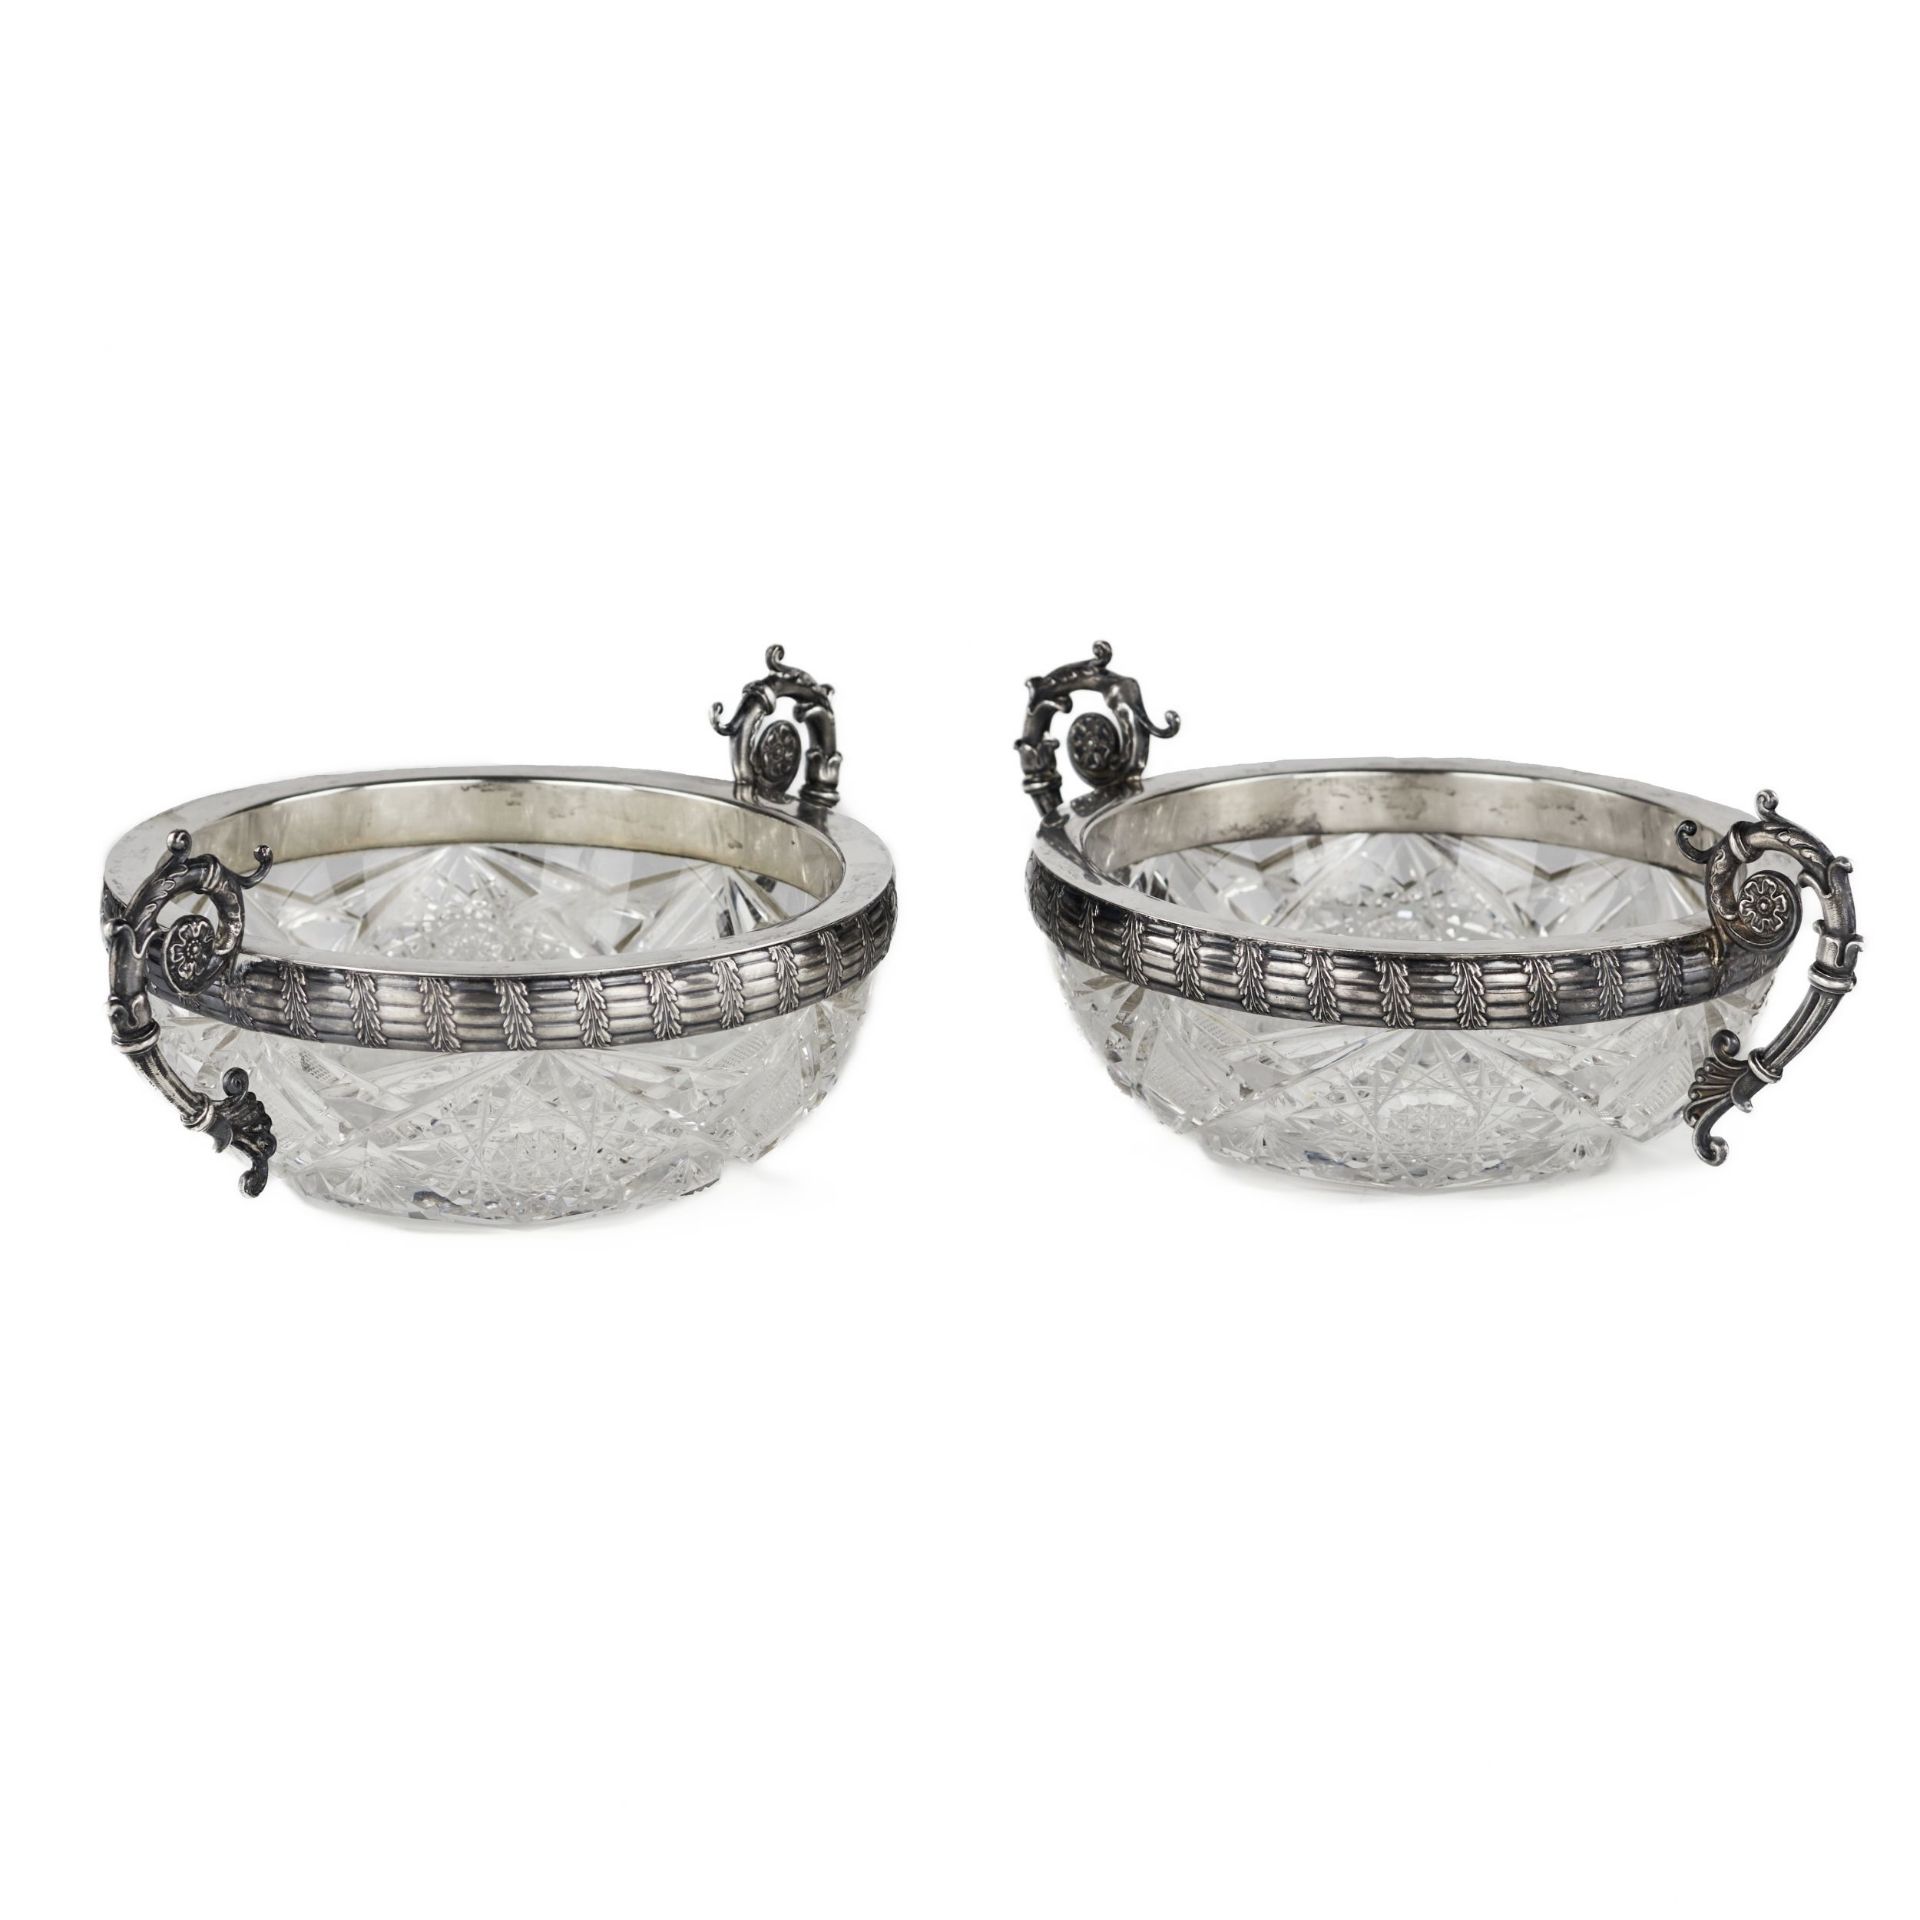 Pair of crystal candy bowls with silver. 15 Artel. Russia. 1908-1917 - Image 3 of 6